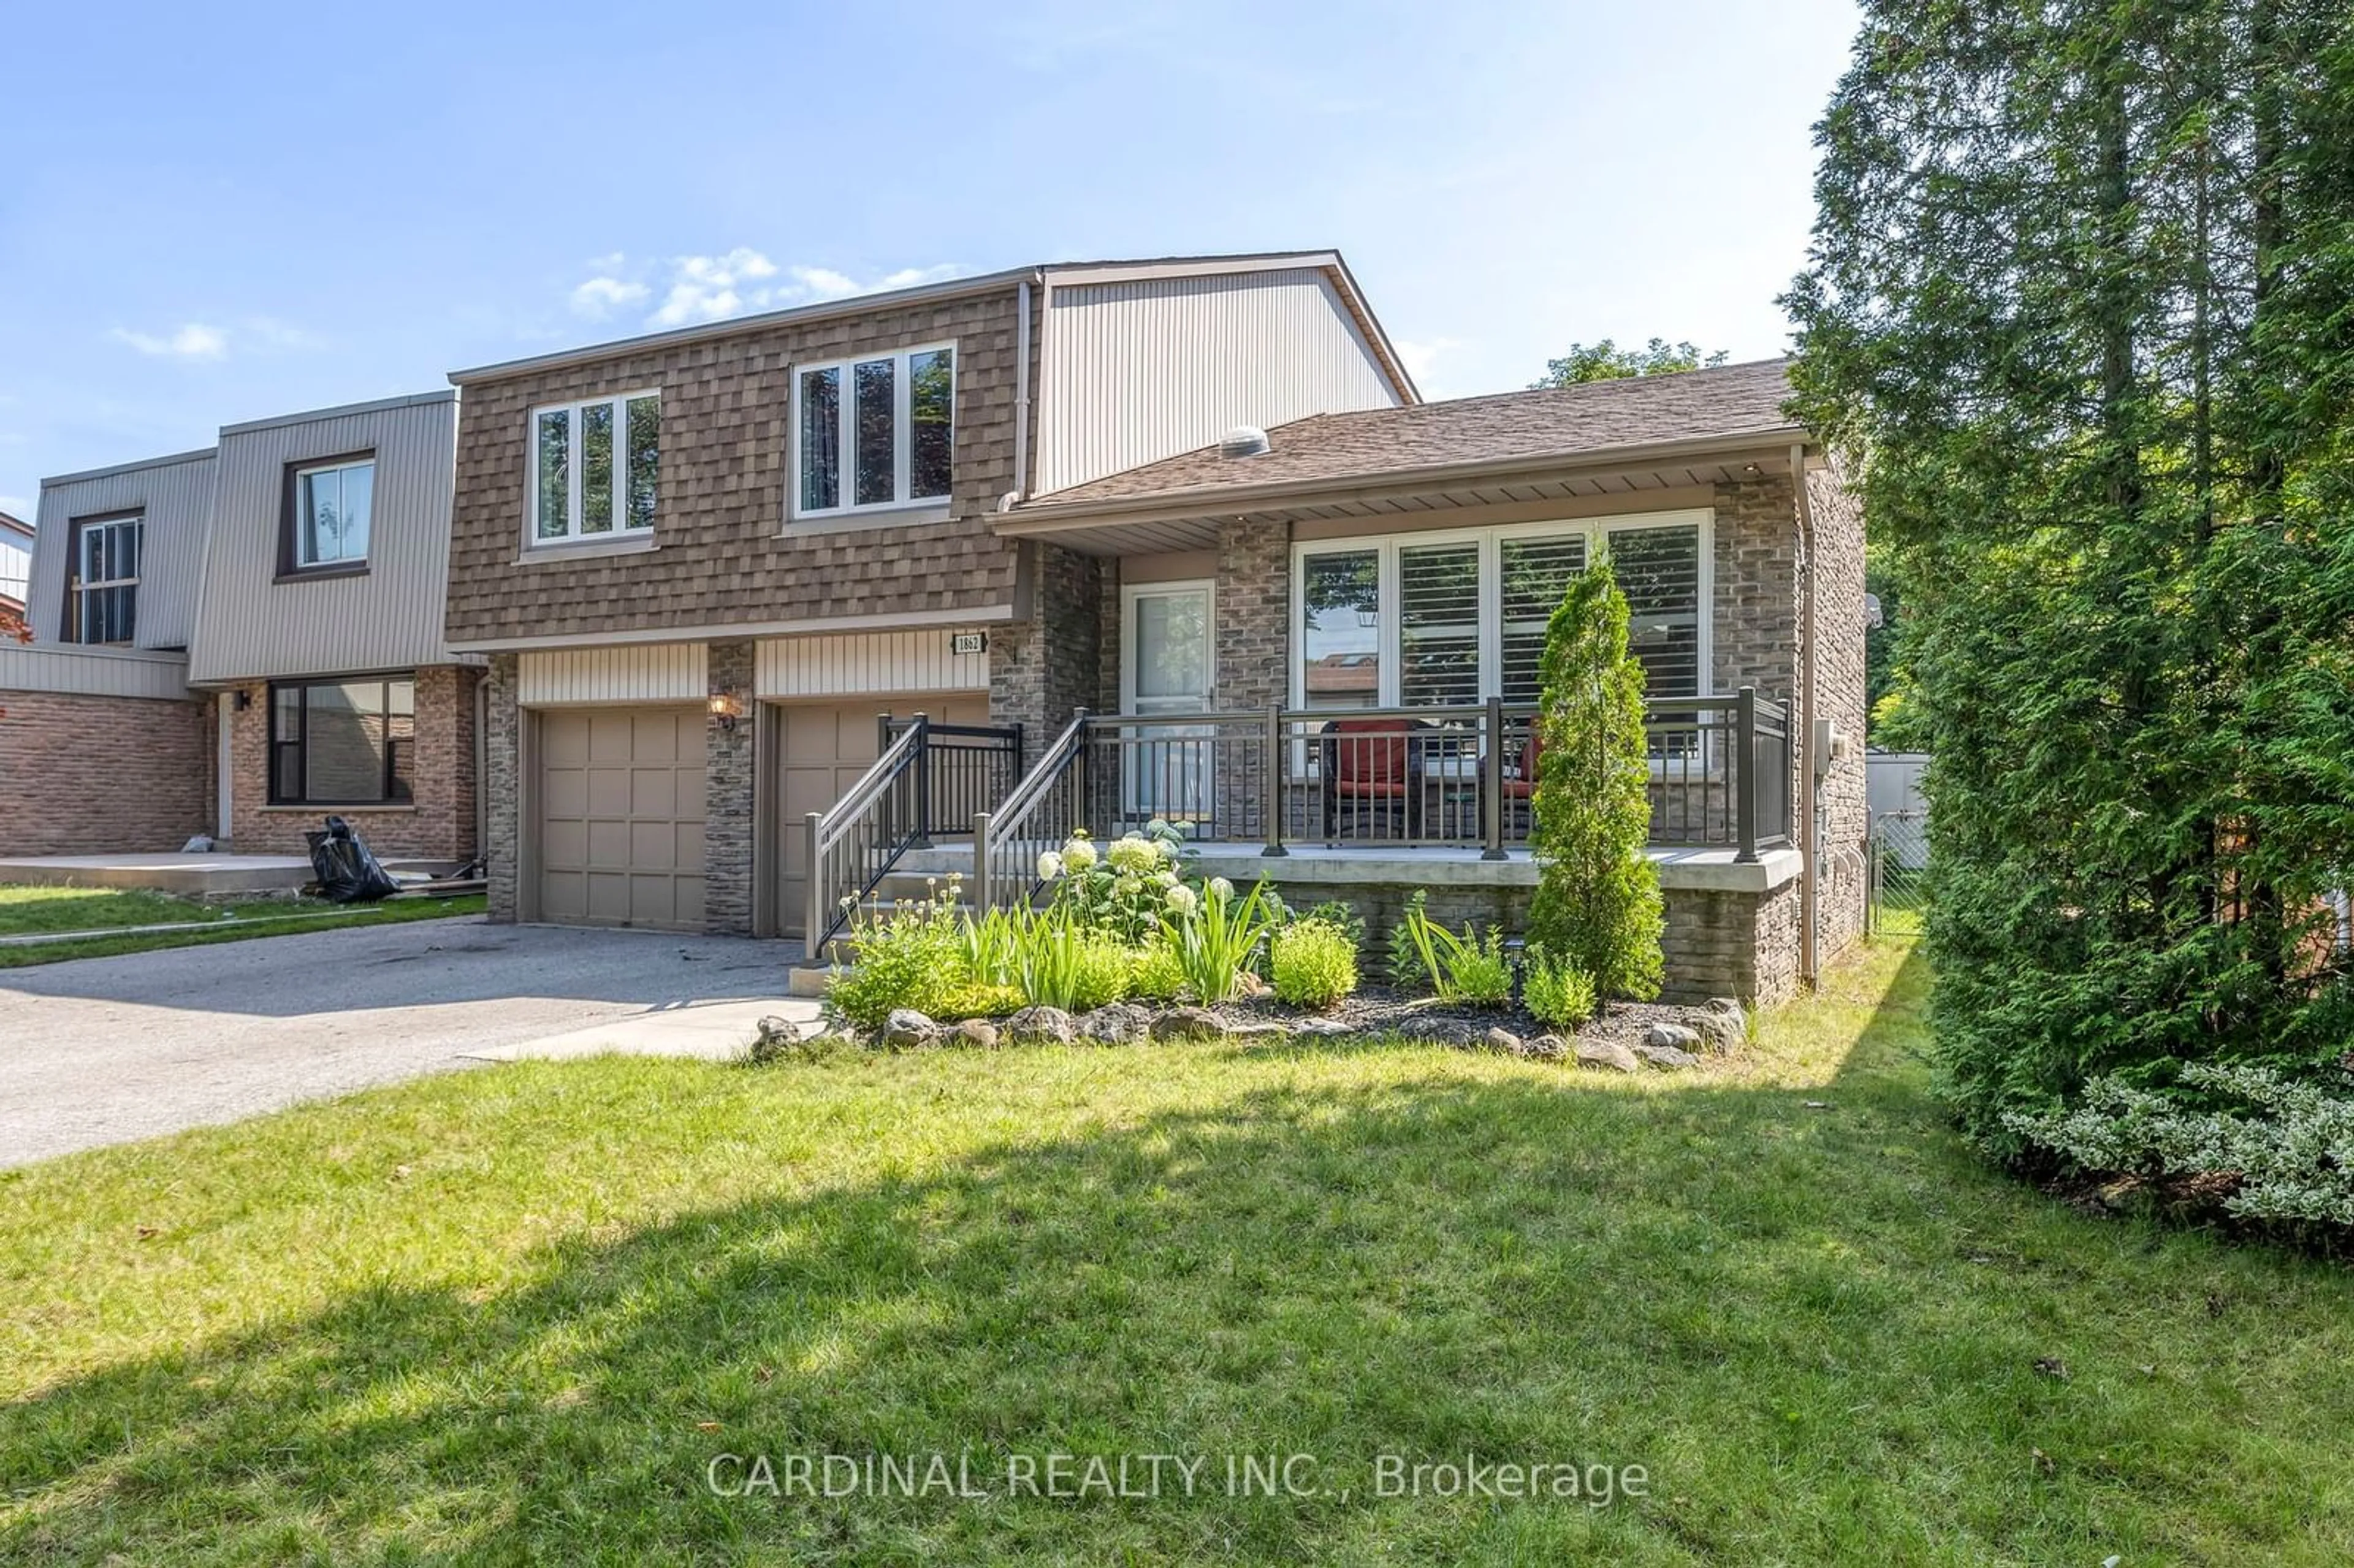 Home with brick exterior material for 1862 Malden Cres, Pickering Ontario L1V 3G4